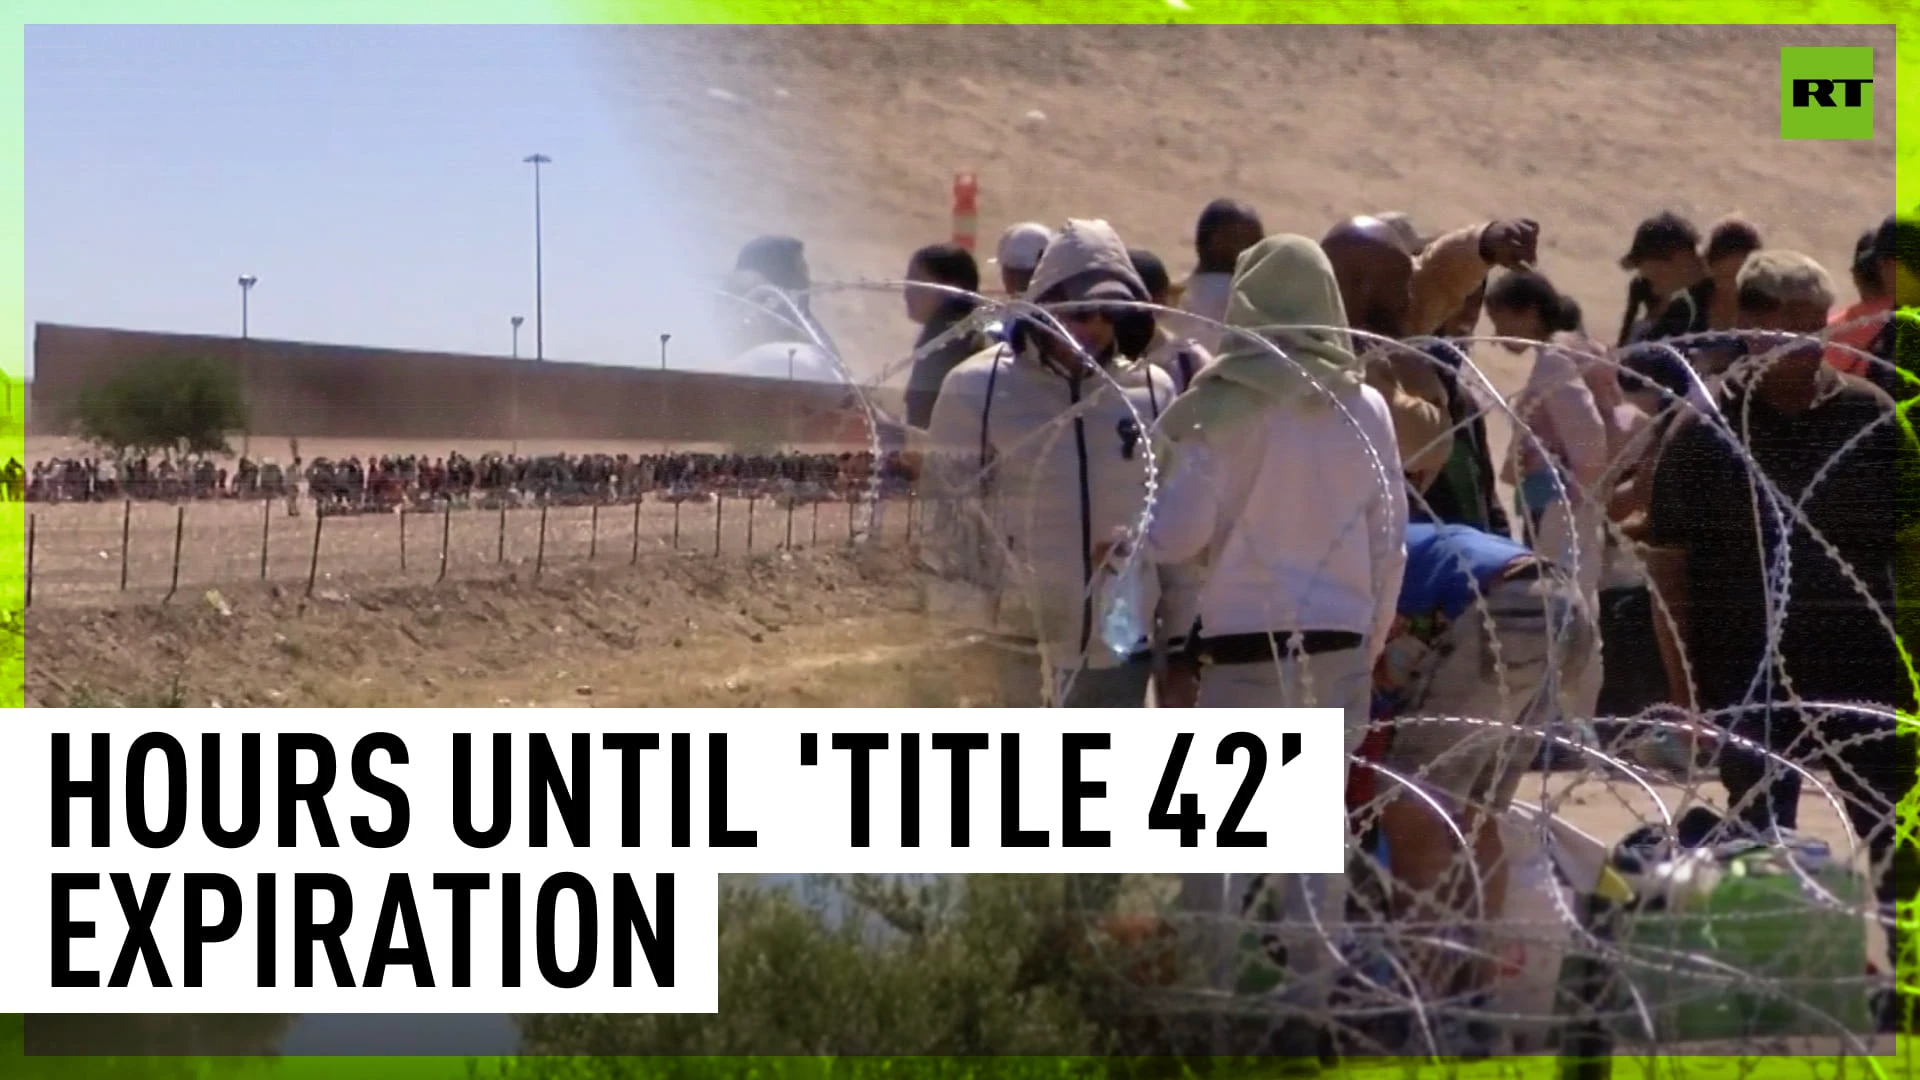 Migrants amass at US border ahead of 'Title 42’ expiration